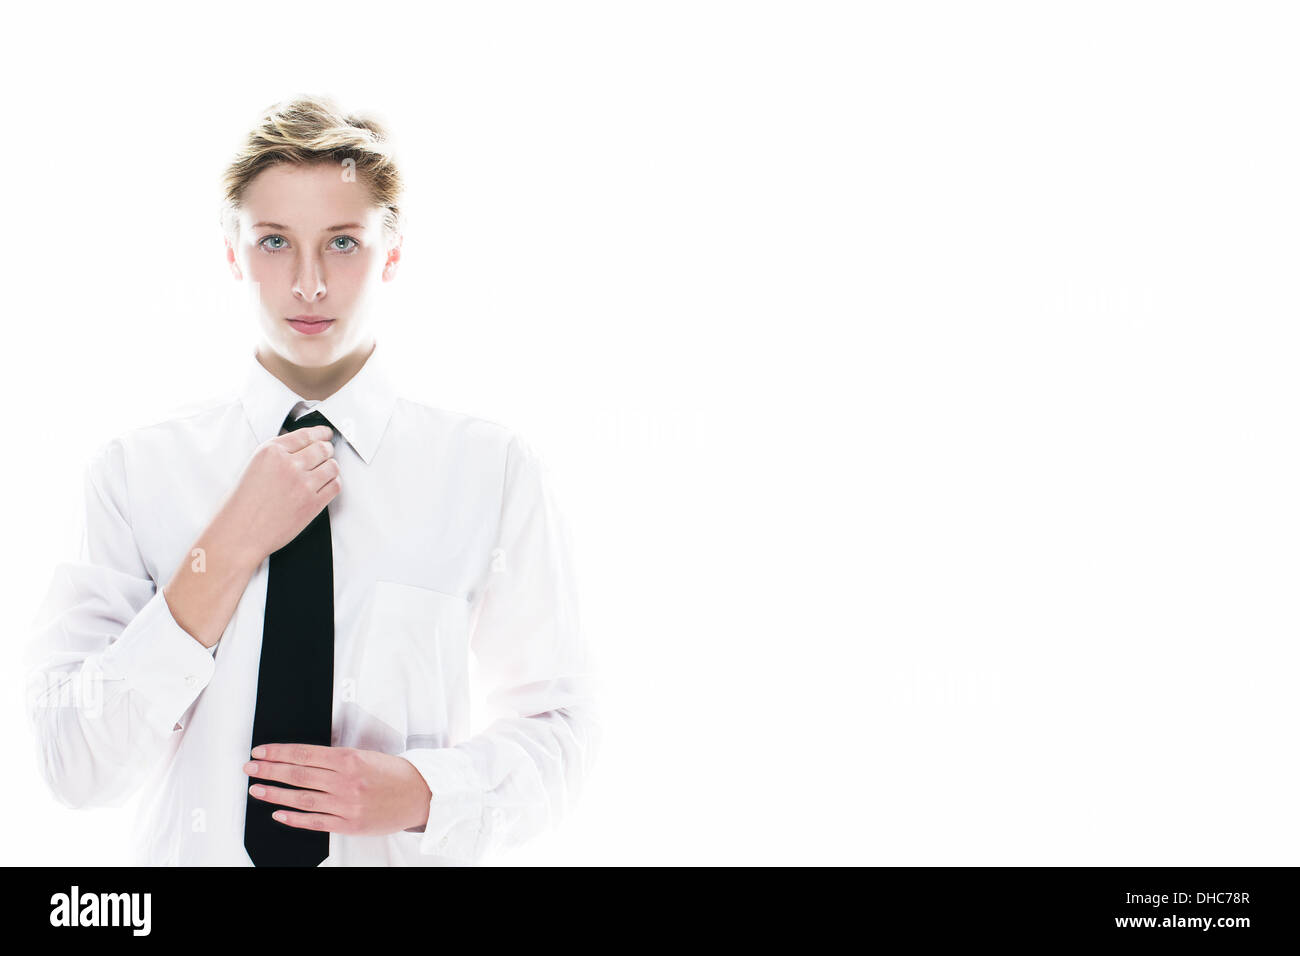 young androgynous woman correcting her black tie on white background Stock Photo